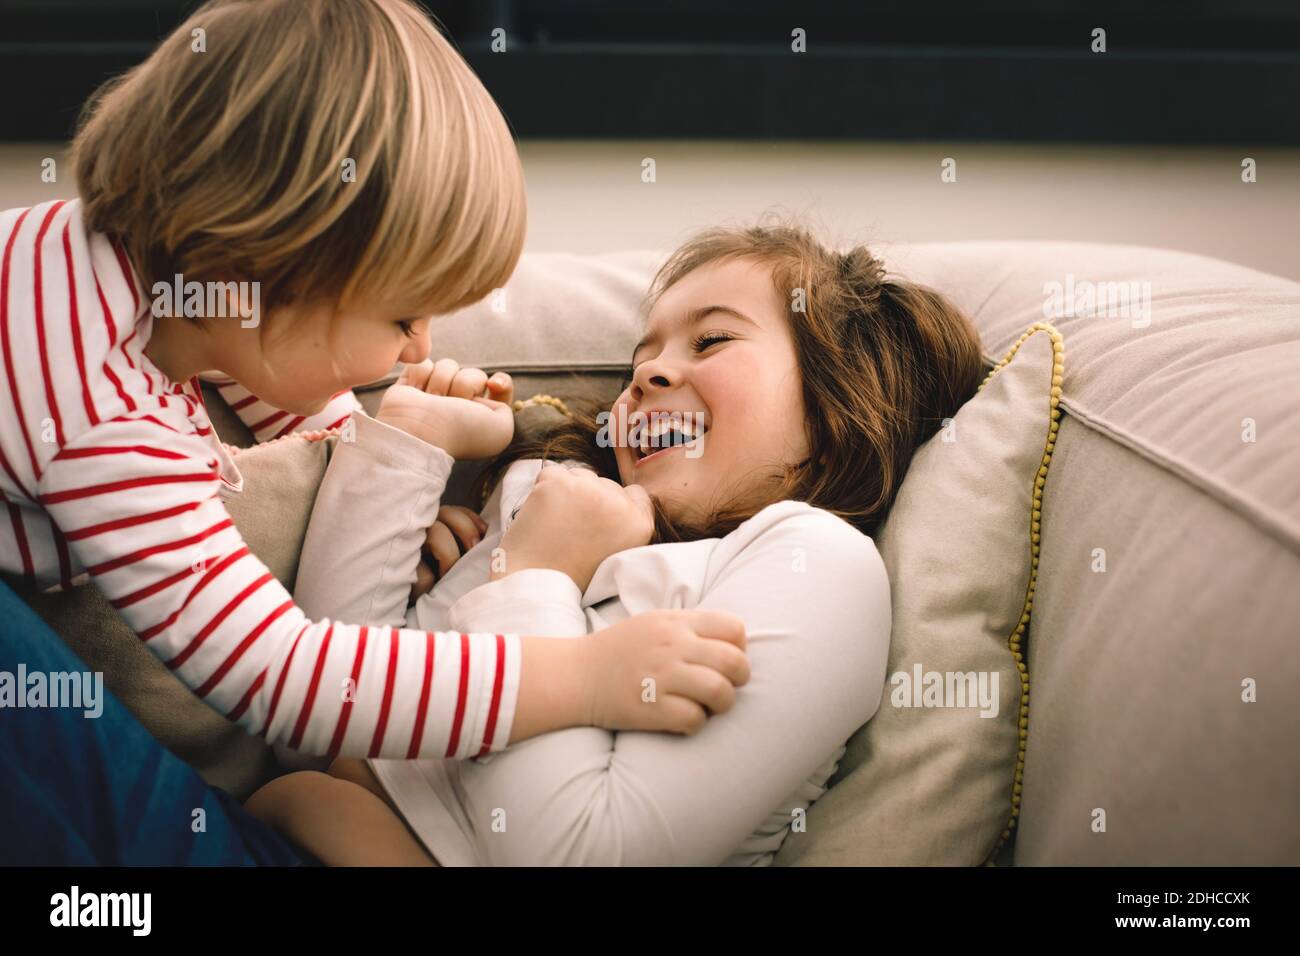 Playful girl tickling cheerful sister on couch at home Stock Photo